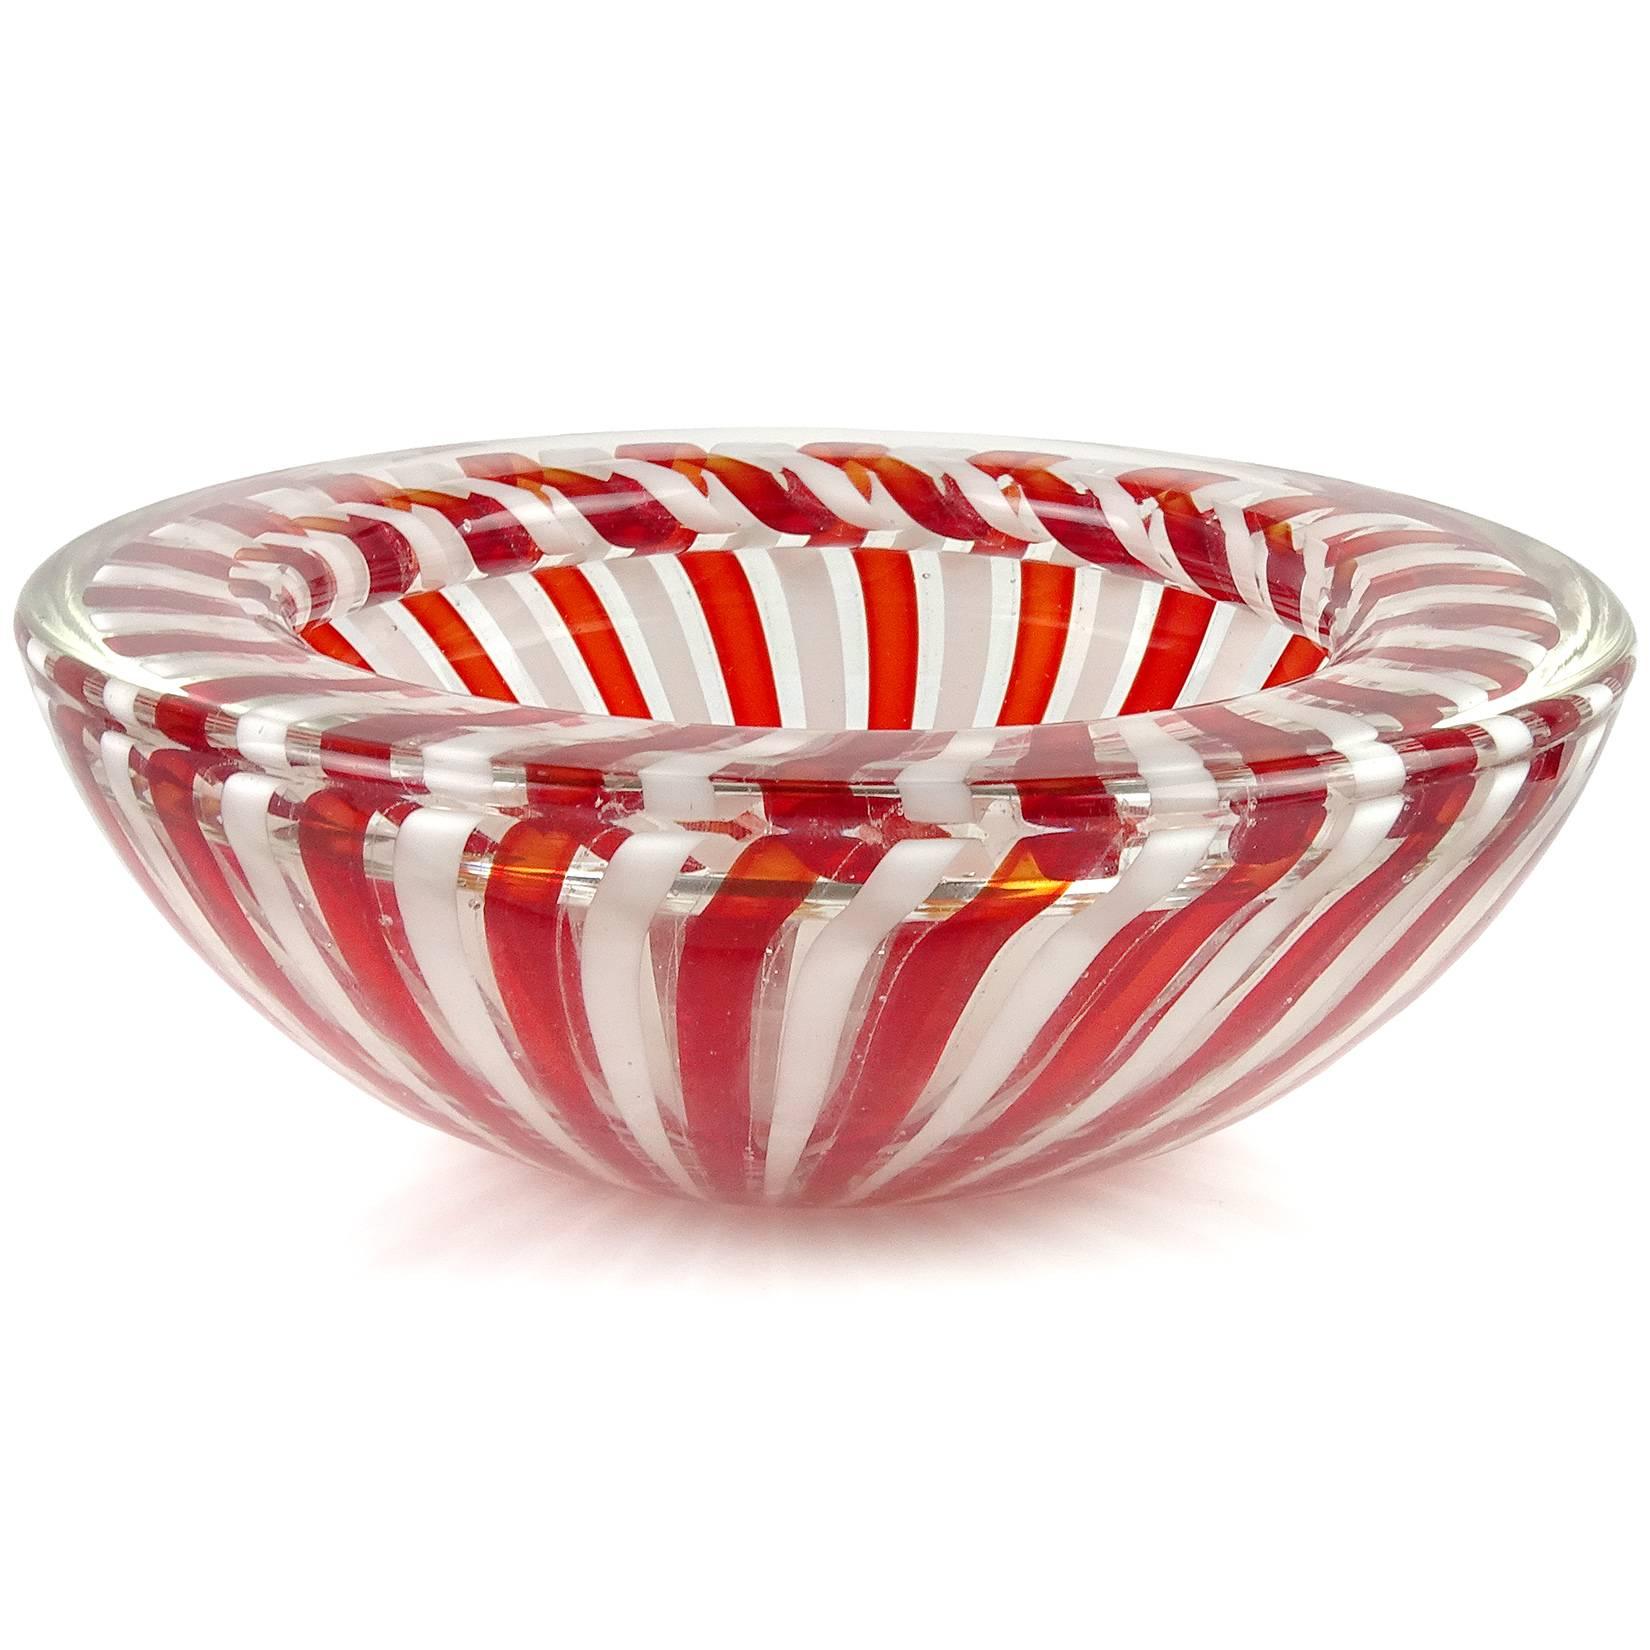 Beautiful Murano hand blown red and white ribbons Italian art glass bowl. Documented to the Fratelli Toso Company. The piece has a folded over rim and pinwheel design. A beautiful statement piece for any table. Measures: 7